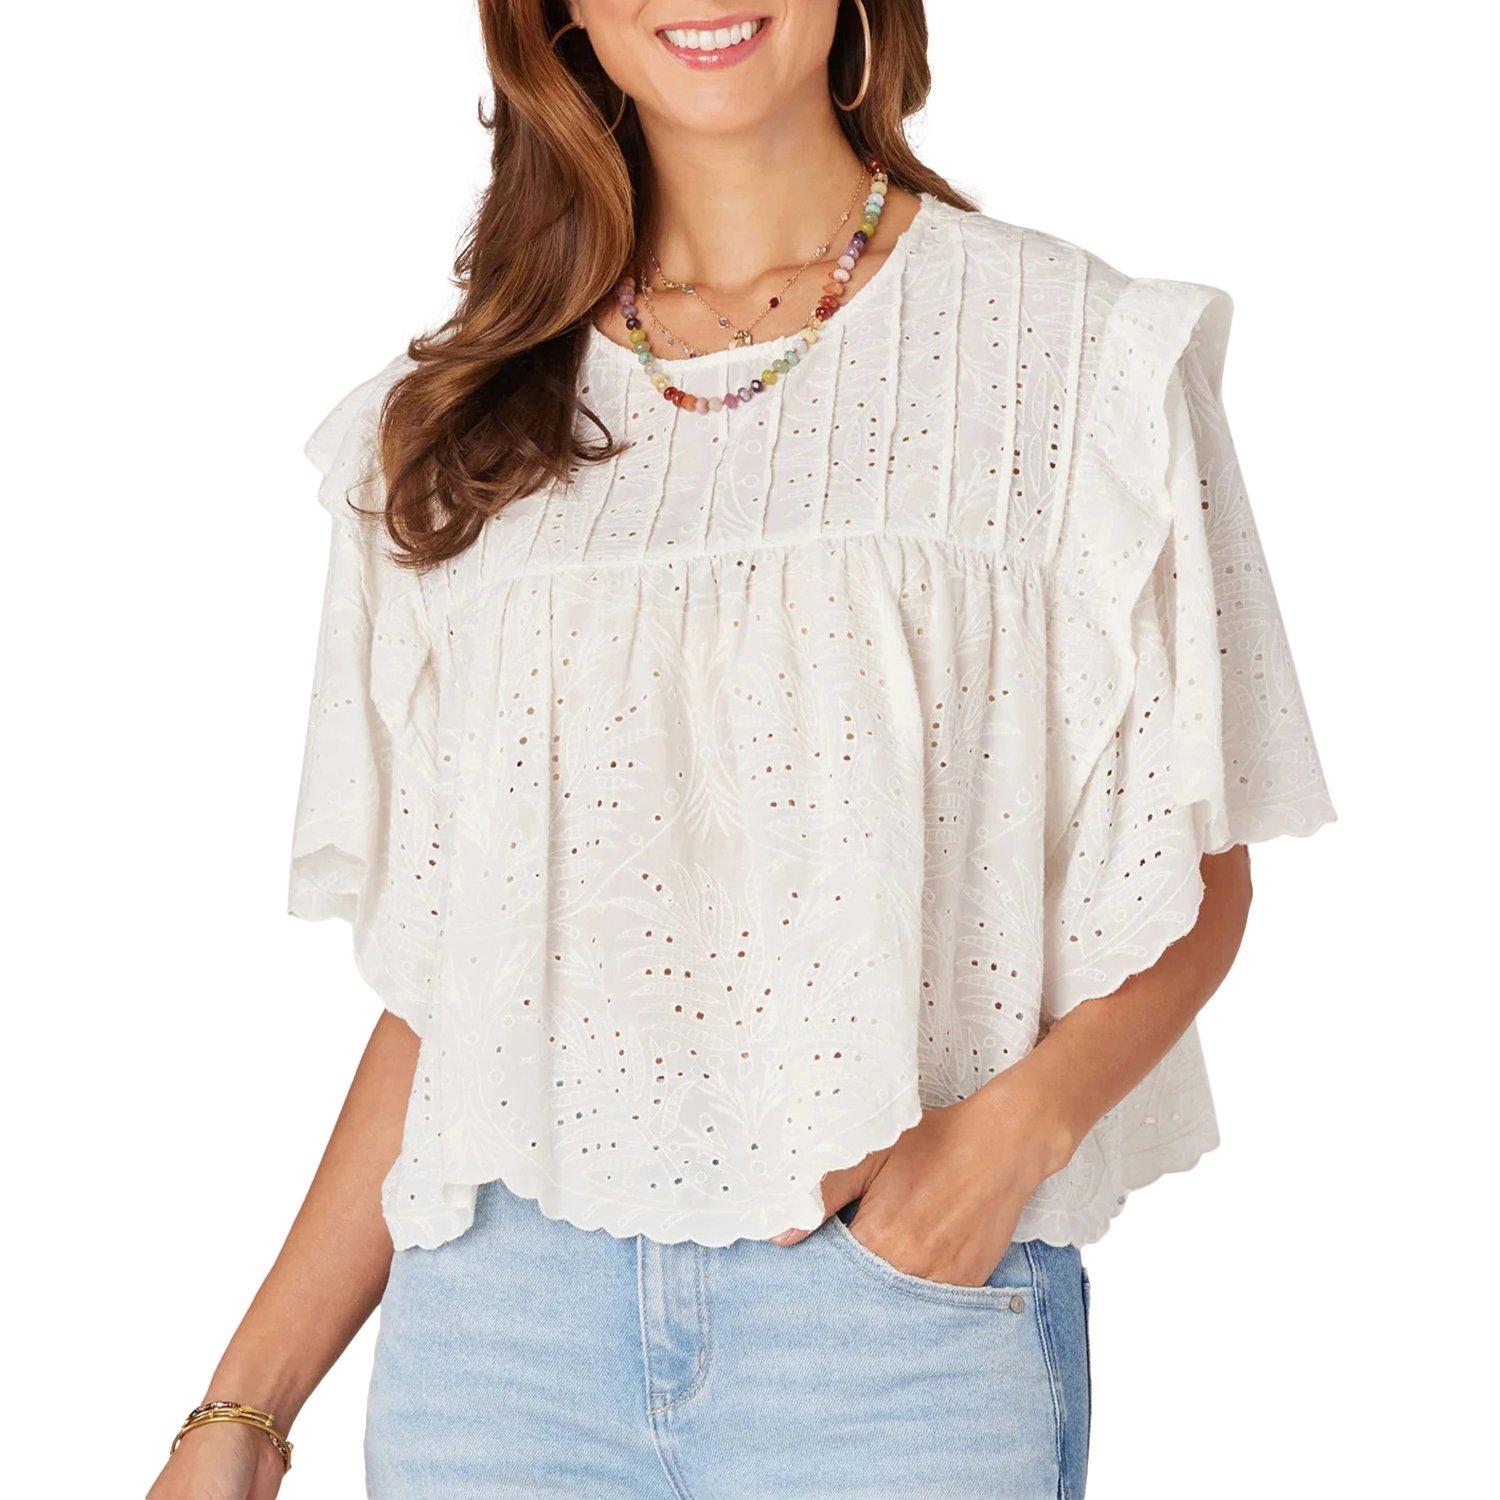 Democracy Womens Short Sleeve Embroidered Eyelet Woven Top